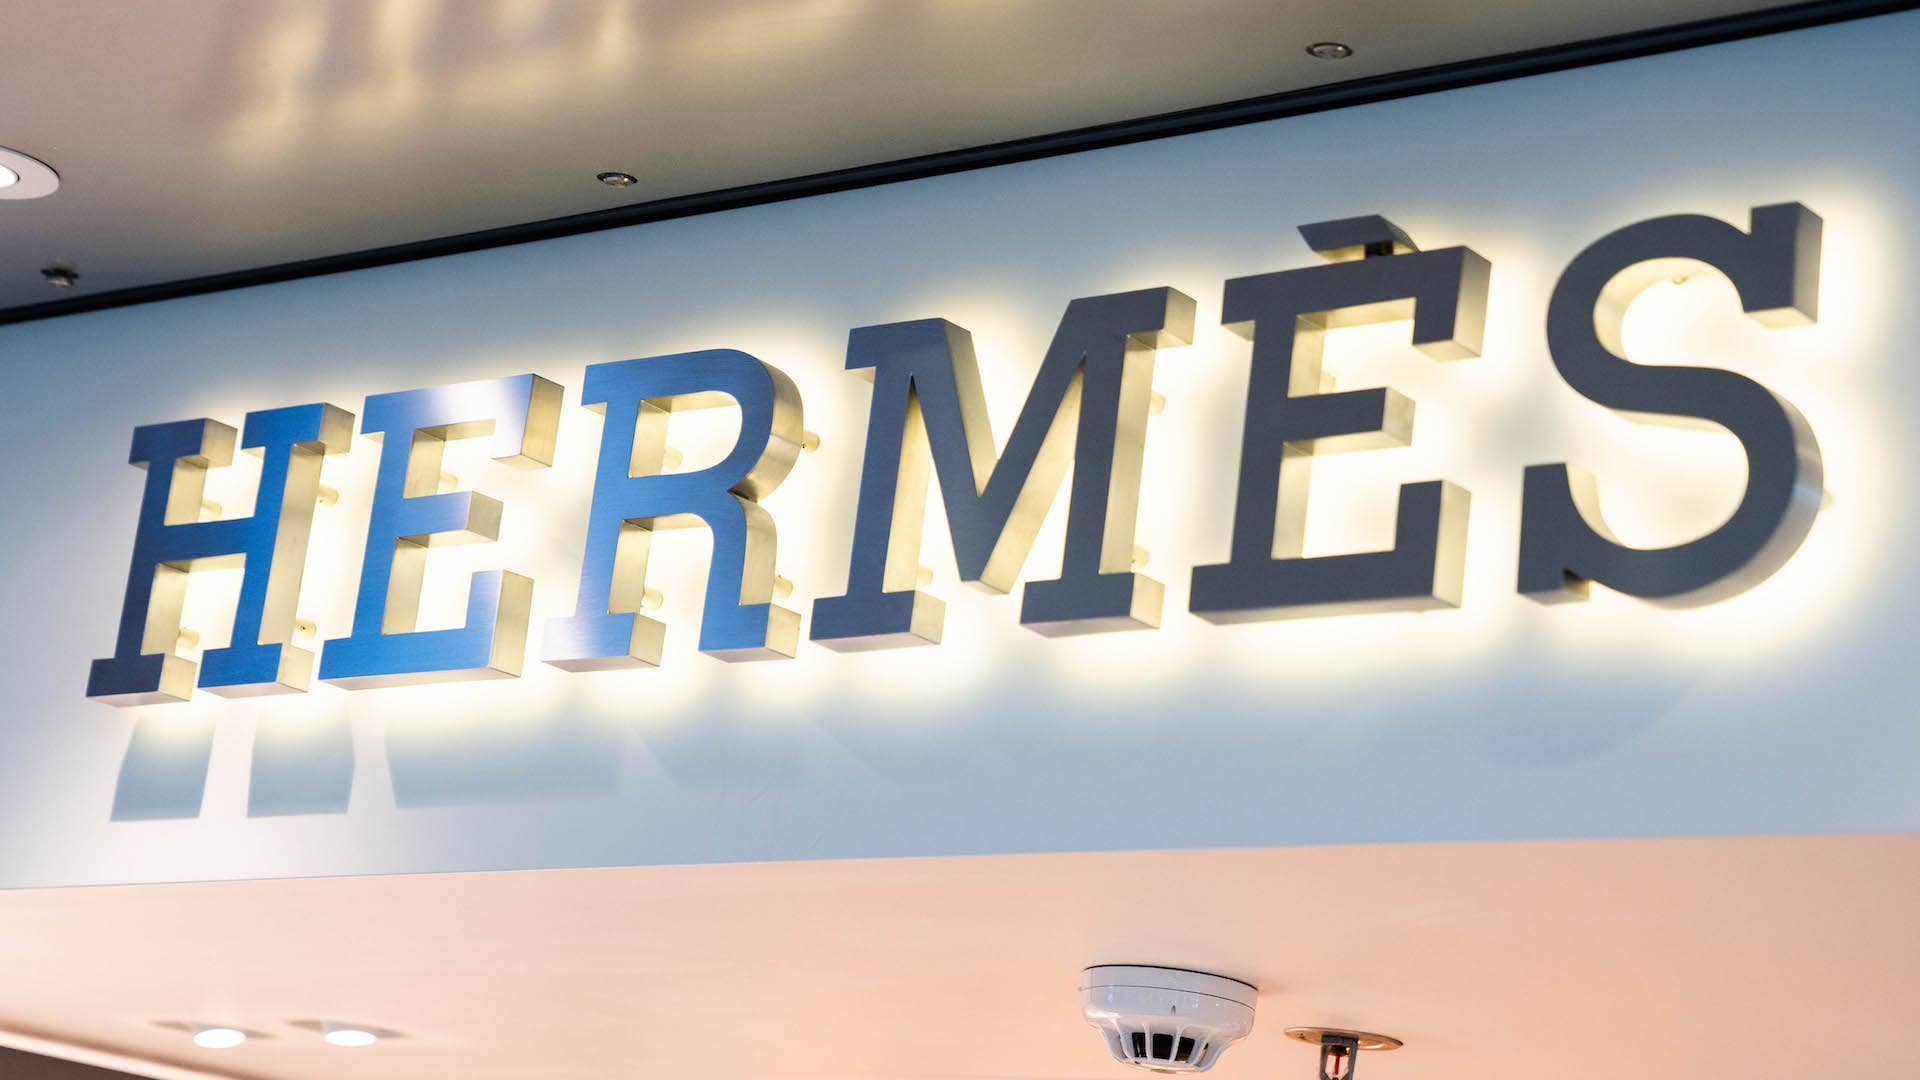 Hermès Store in China Reportedly Earned $2.7 Million the Day It Reopened